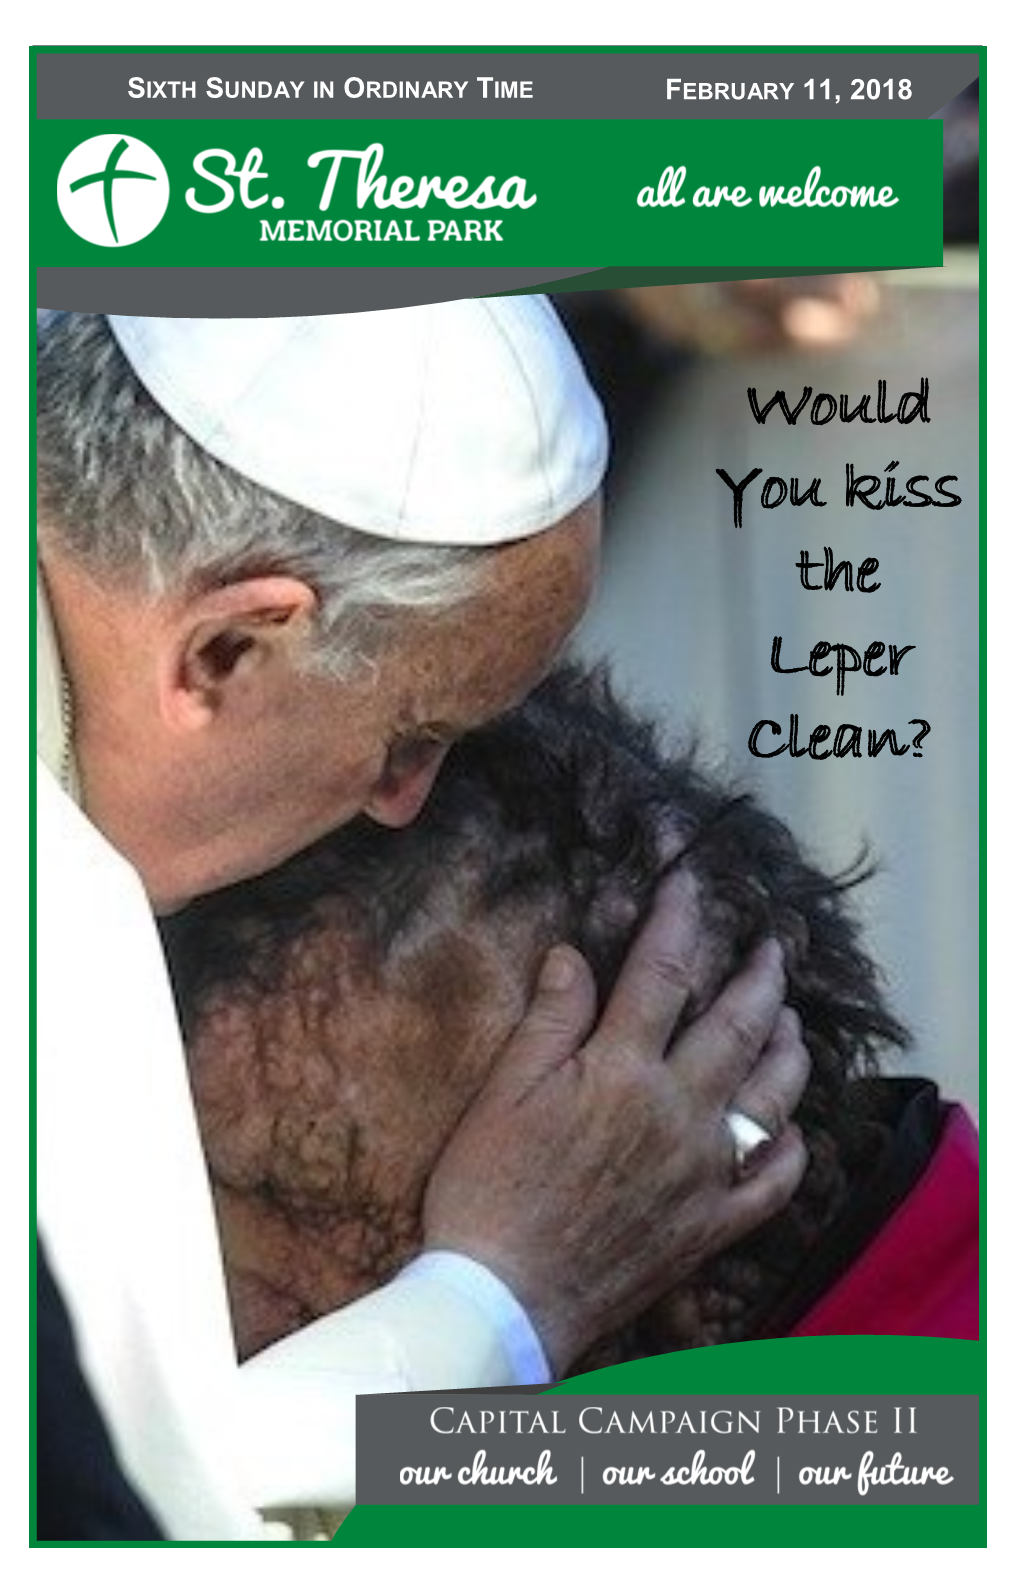 Would You Kiss the Leper Clean?